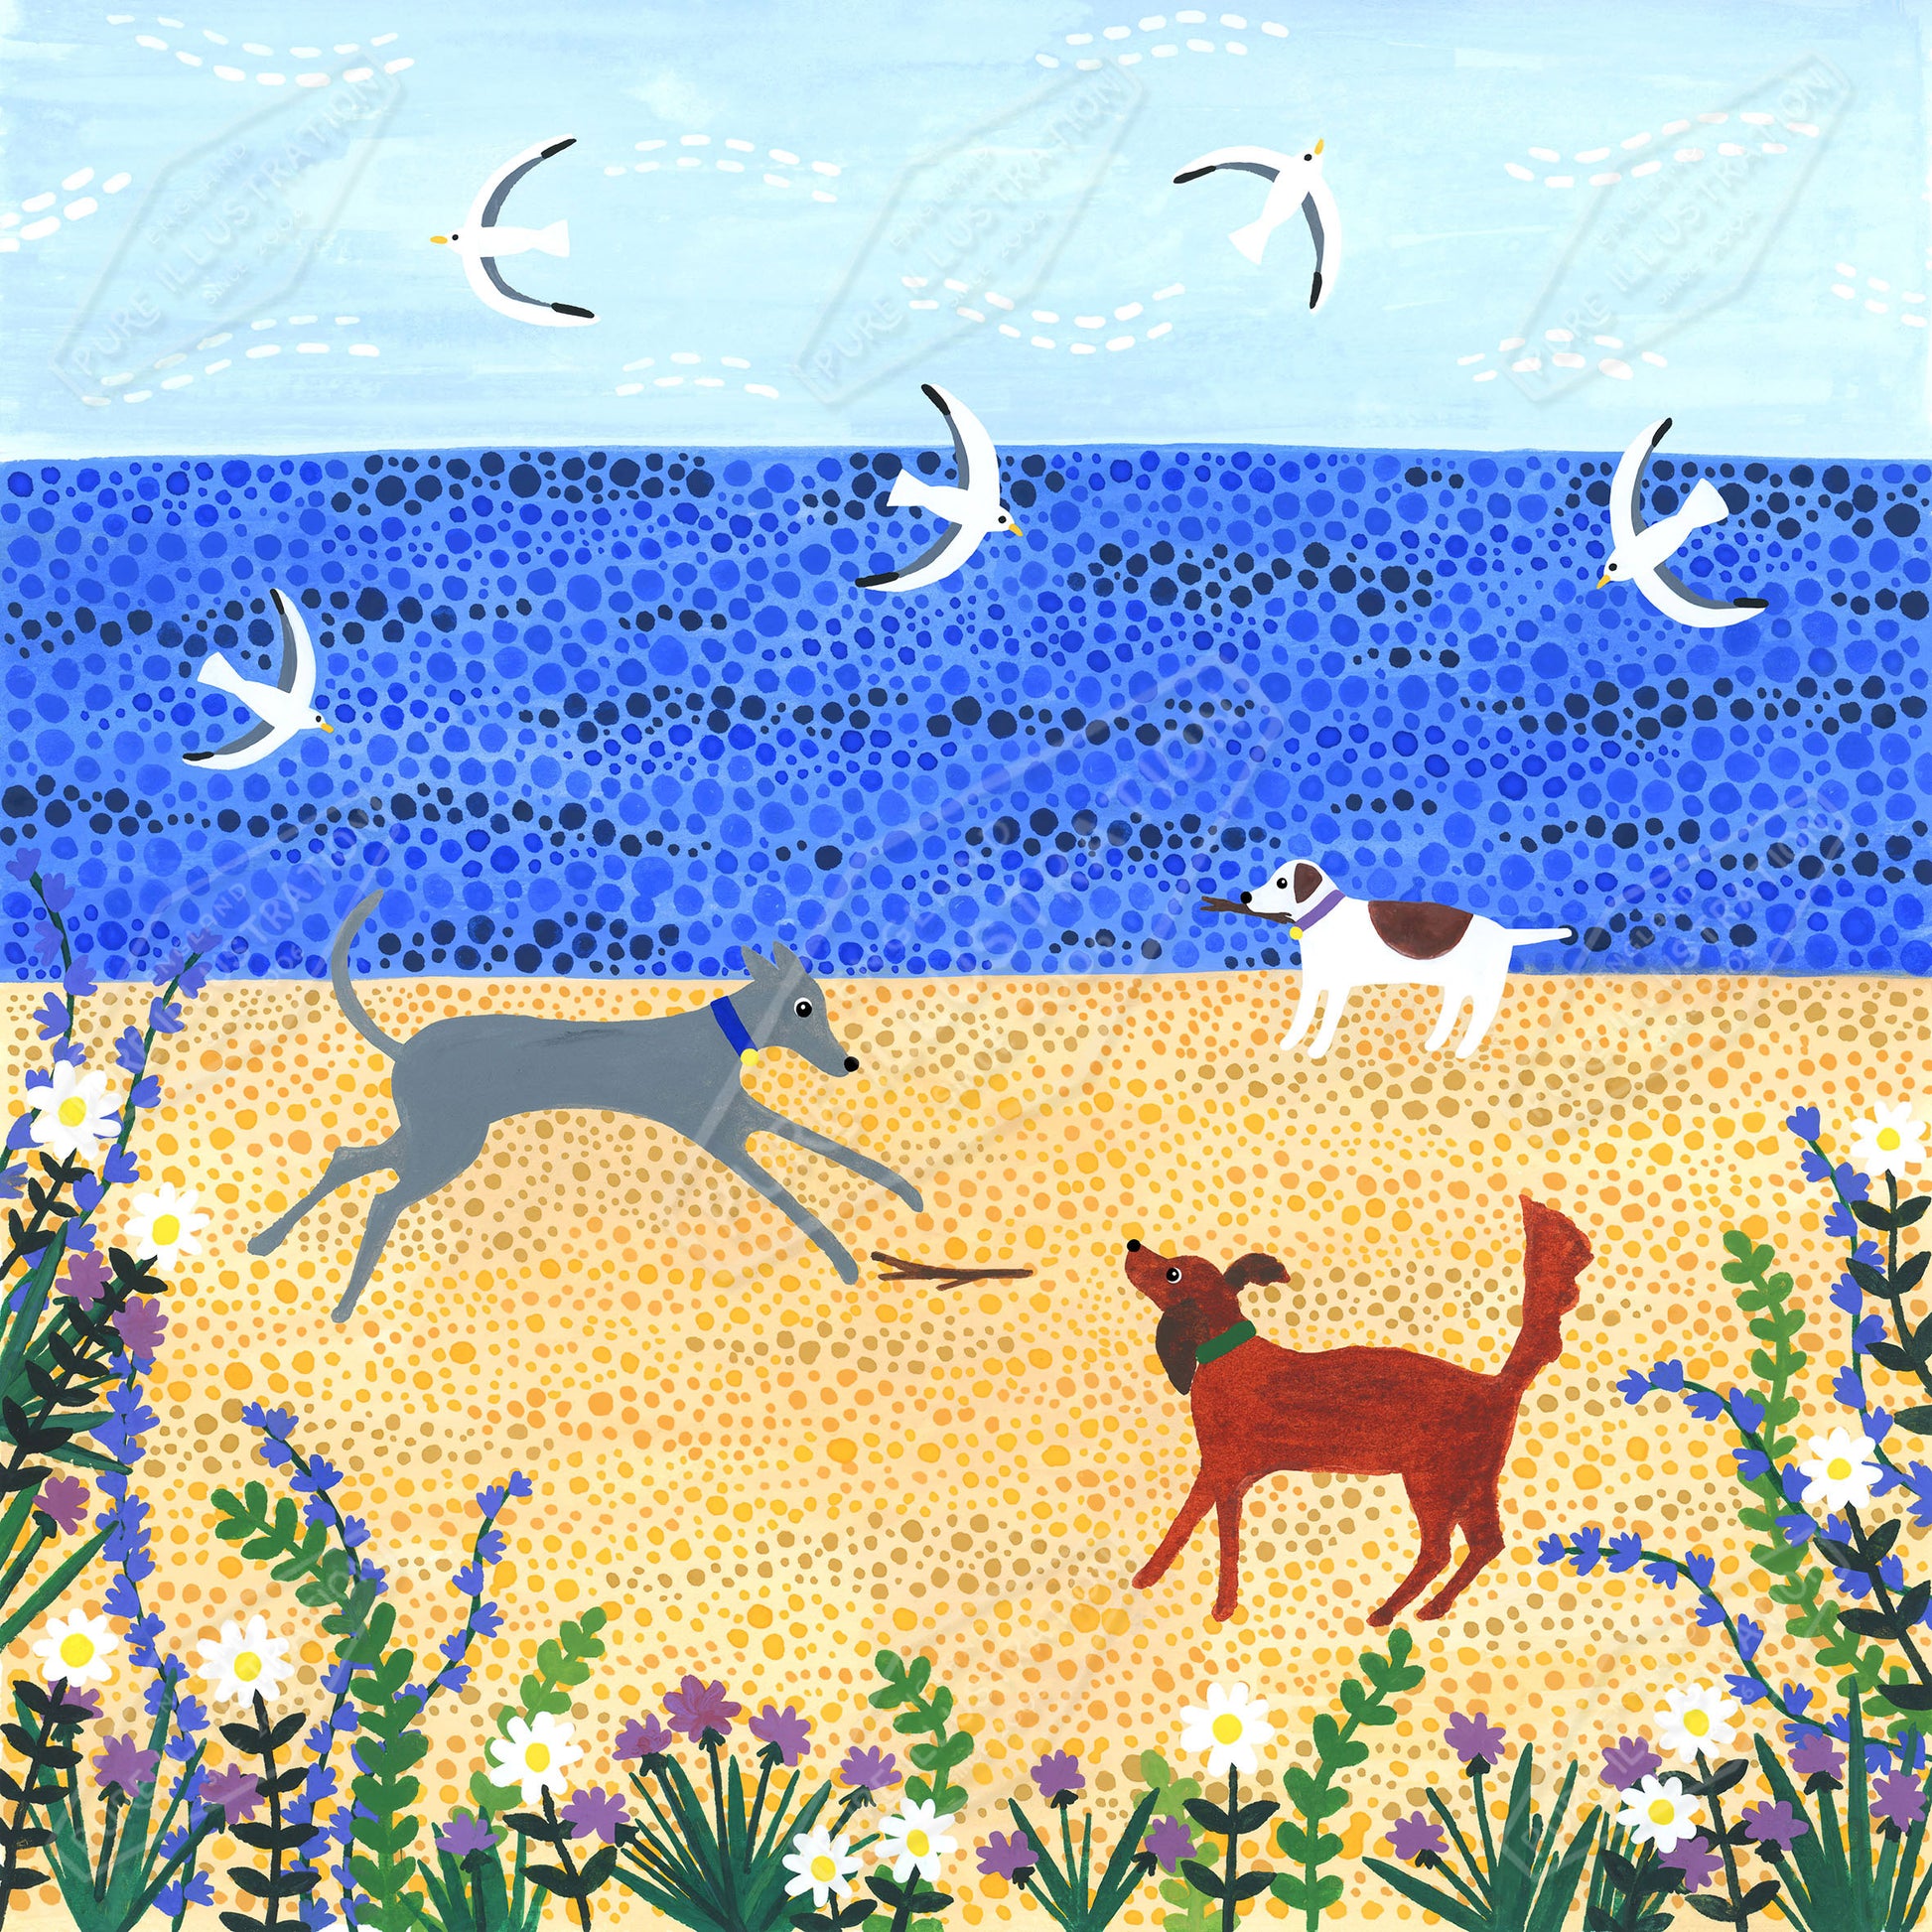 00035665SSN- Sian Summerhayes is represented by Pure Art Licensing Agency - Everyday Greeting Card Design